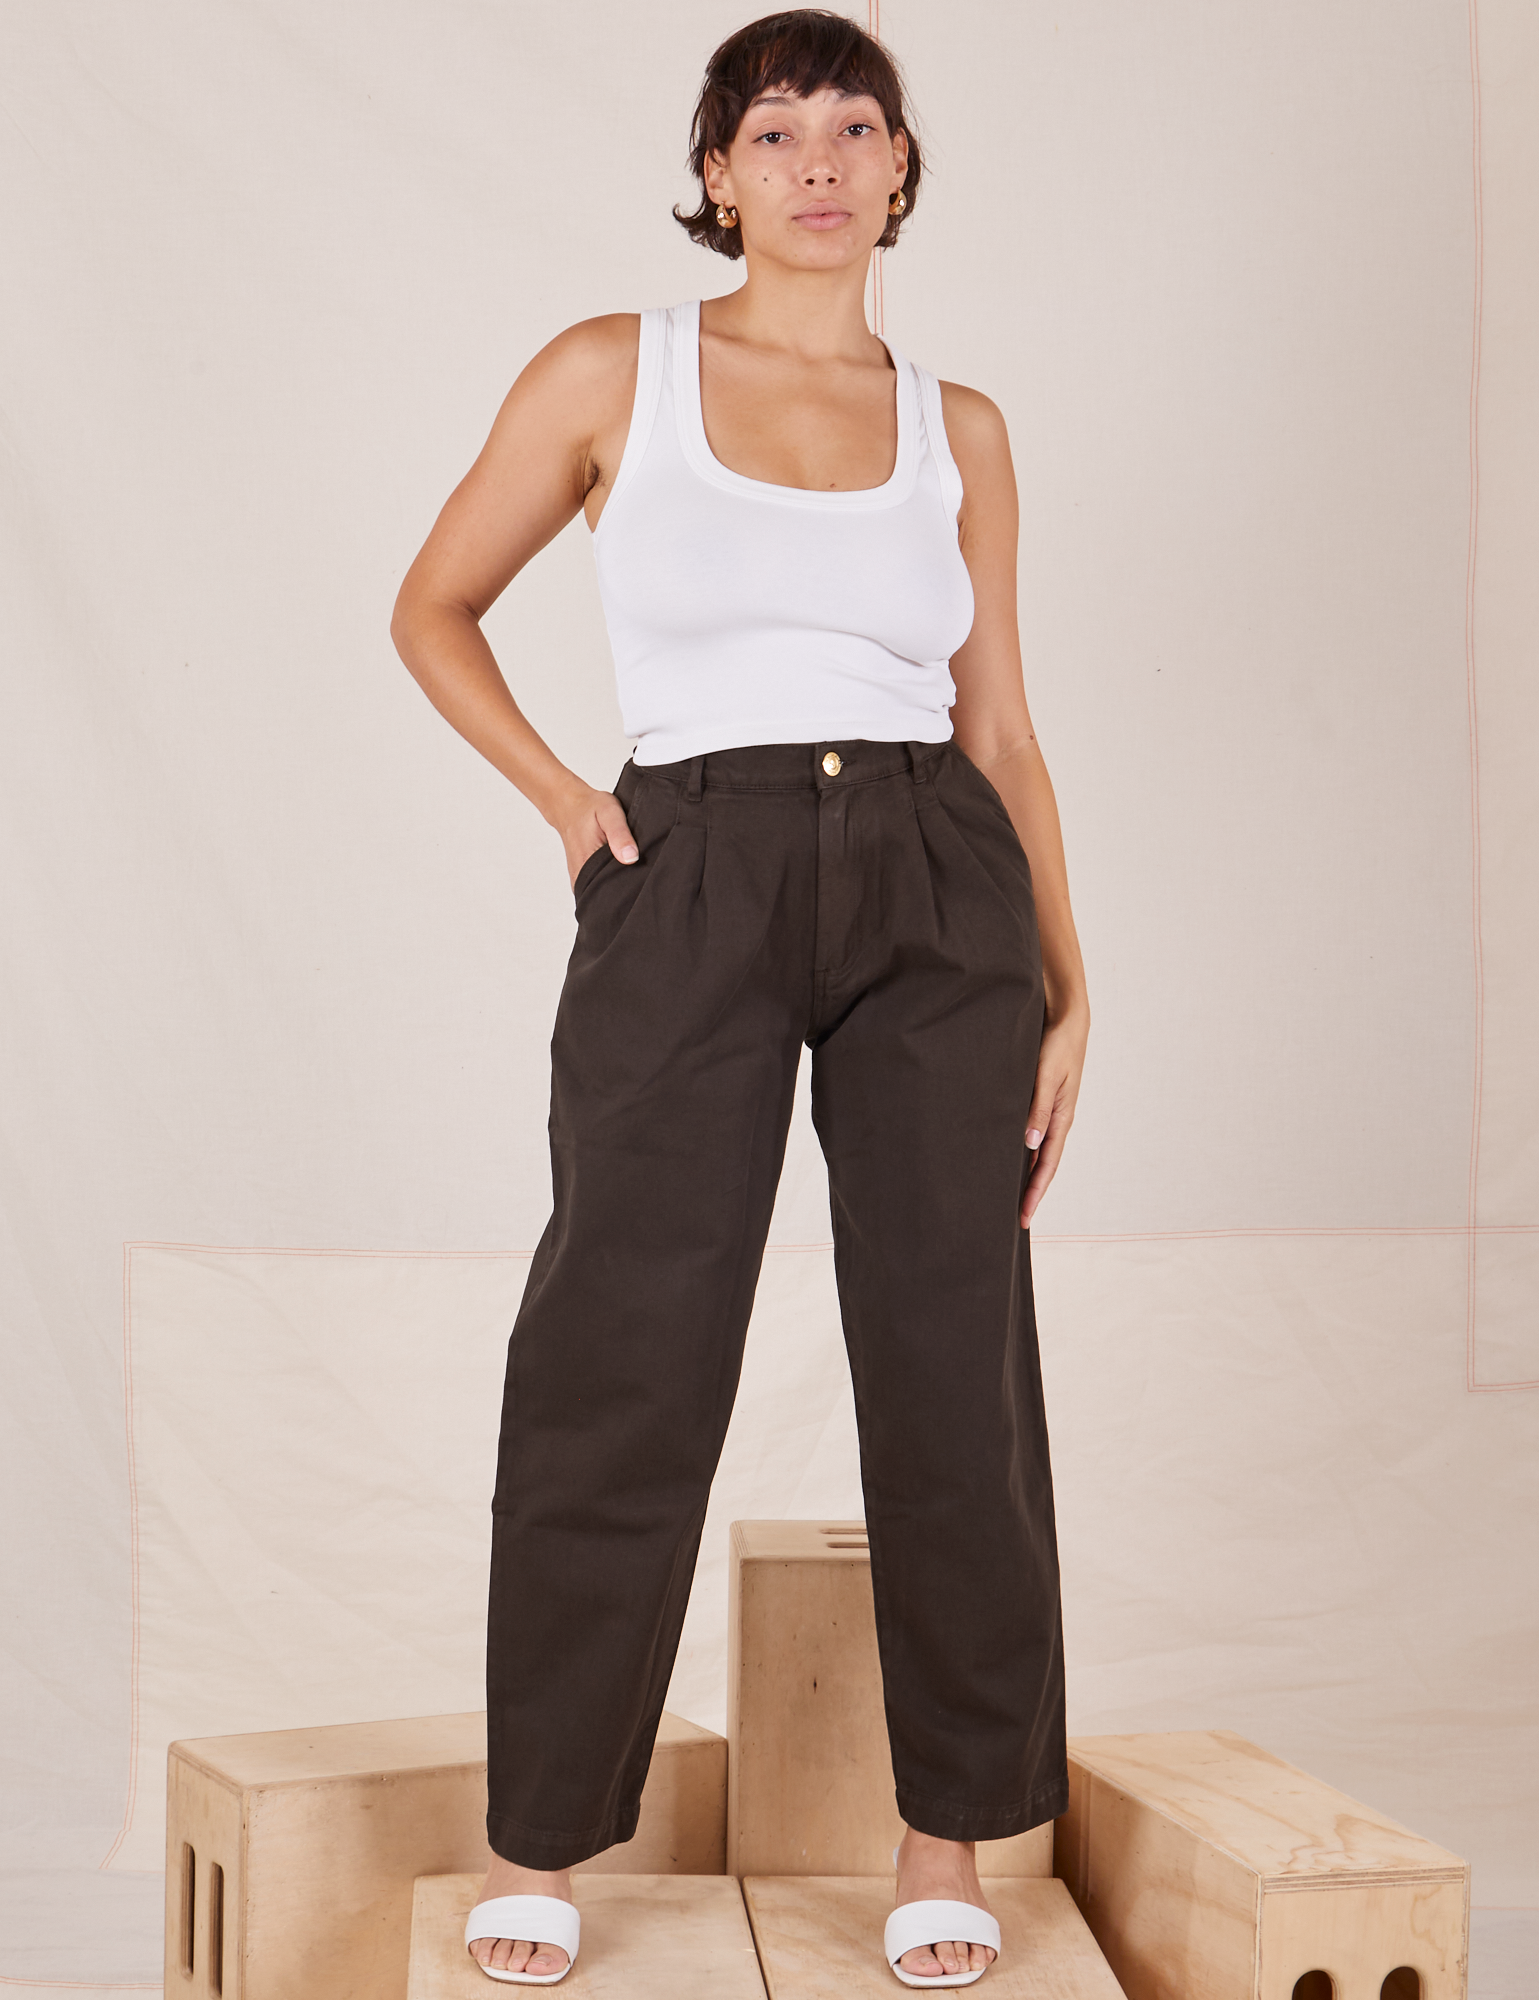 Tiara is 5&#39;4&quot; and wearing S Heavyweight Trousers in Espresso Brown paired with Cropped Tank Top in vintage tee off-white